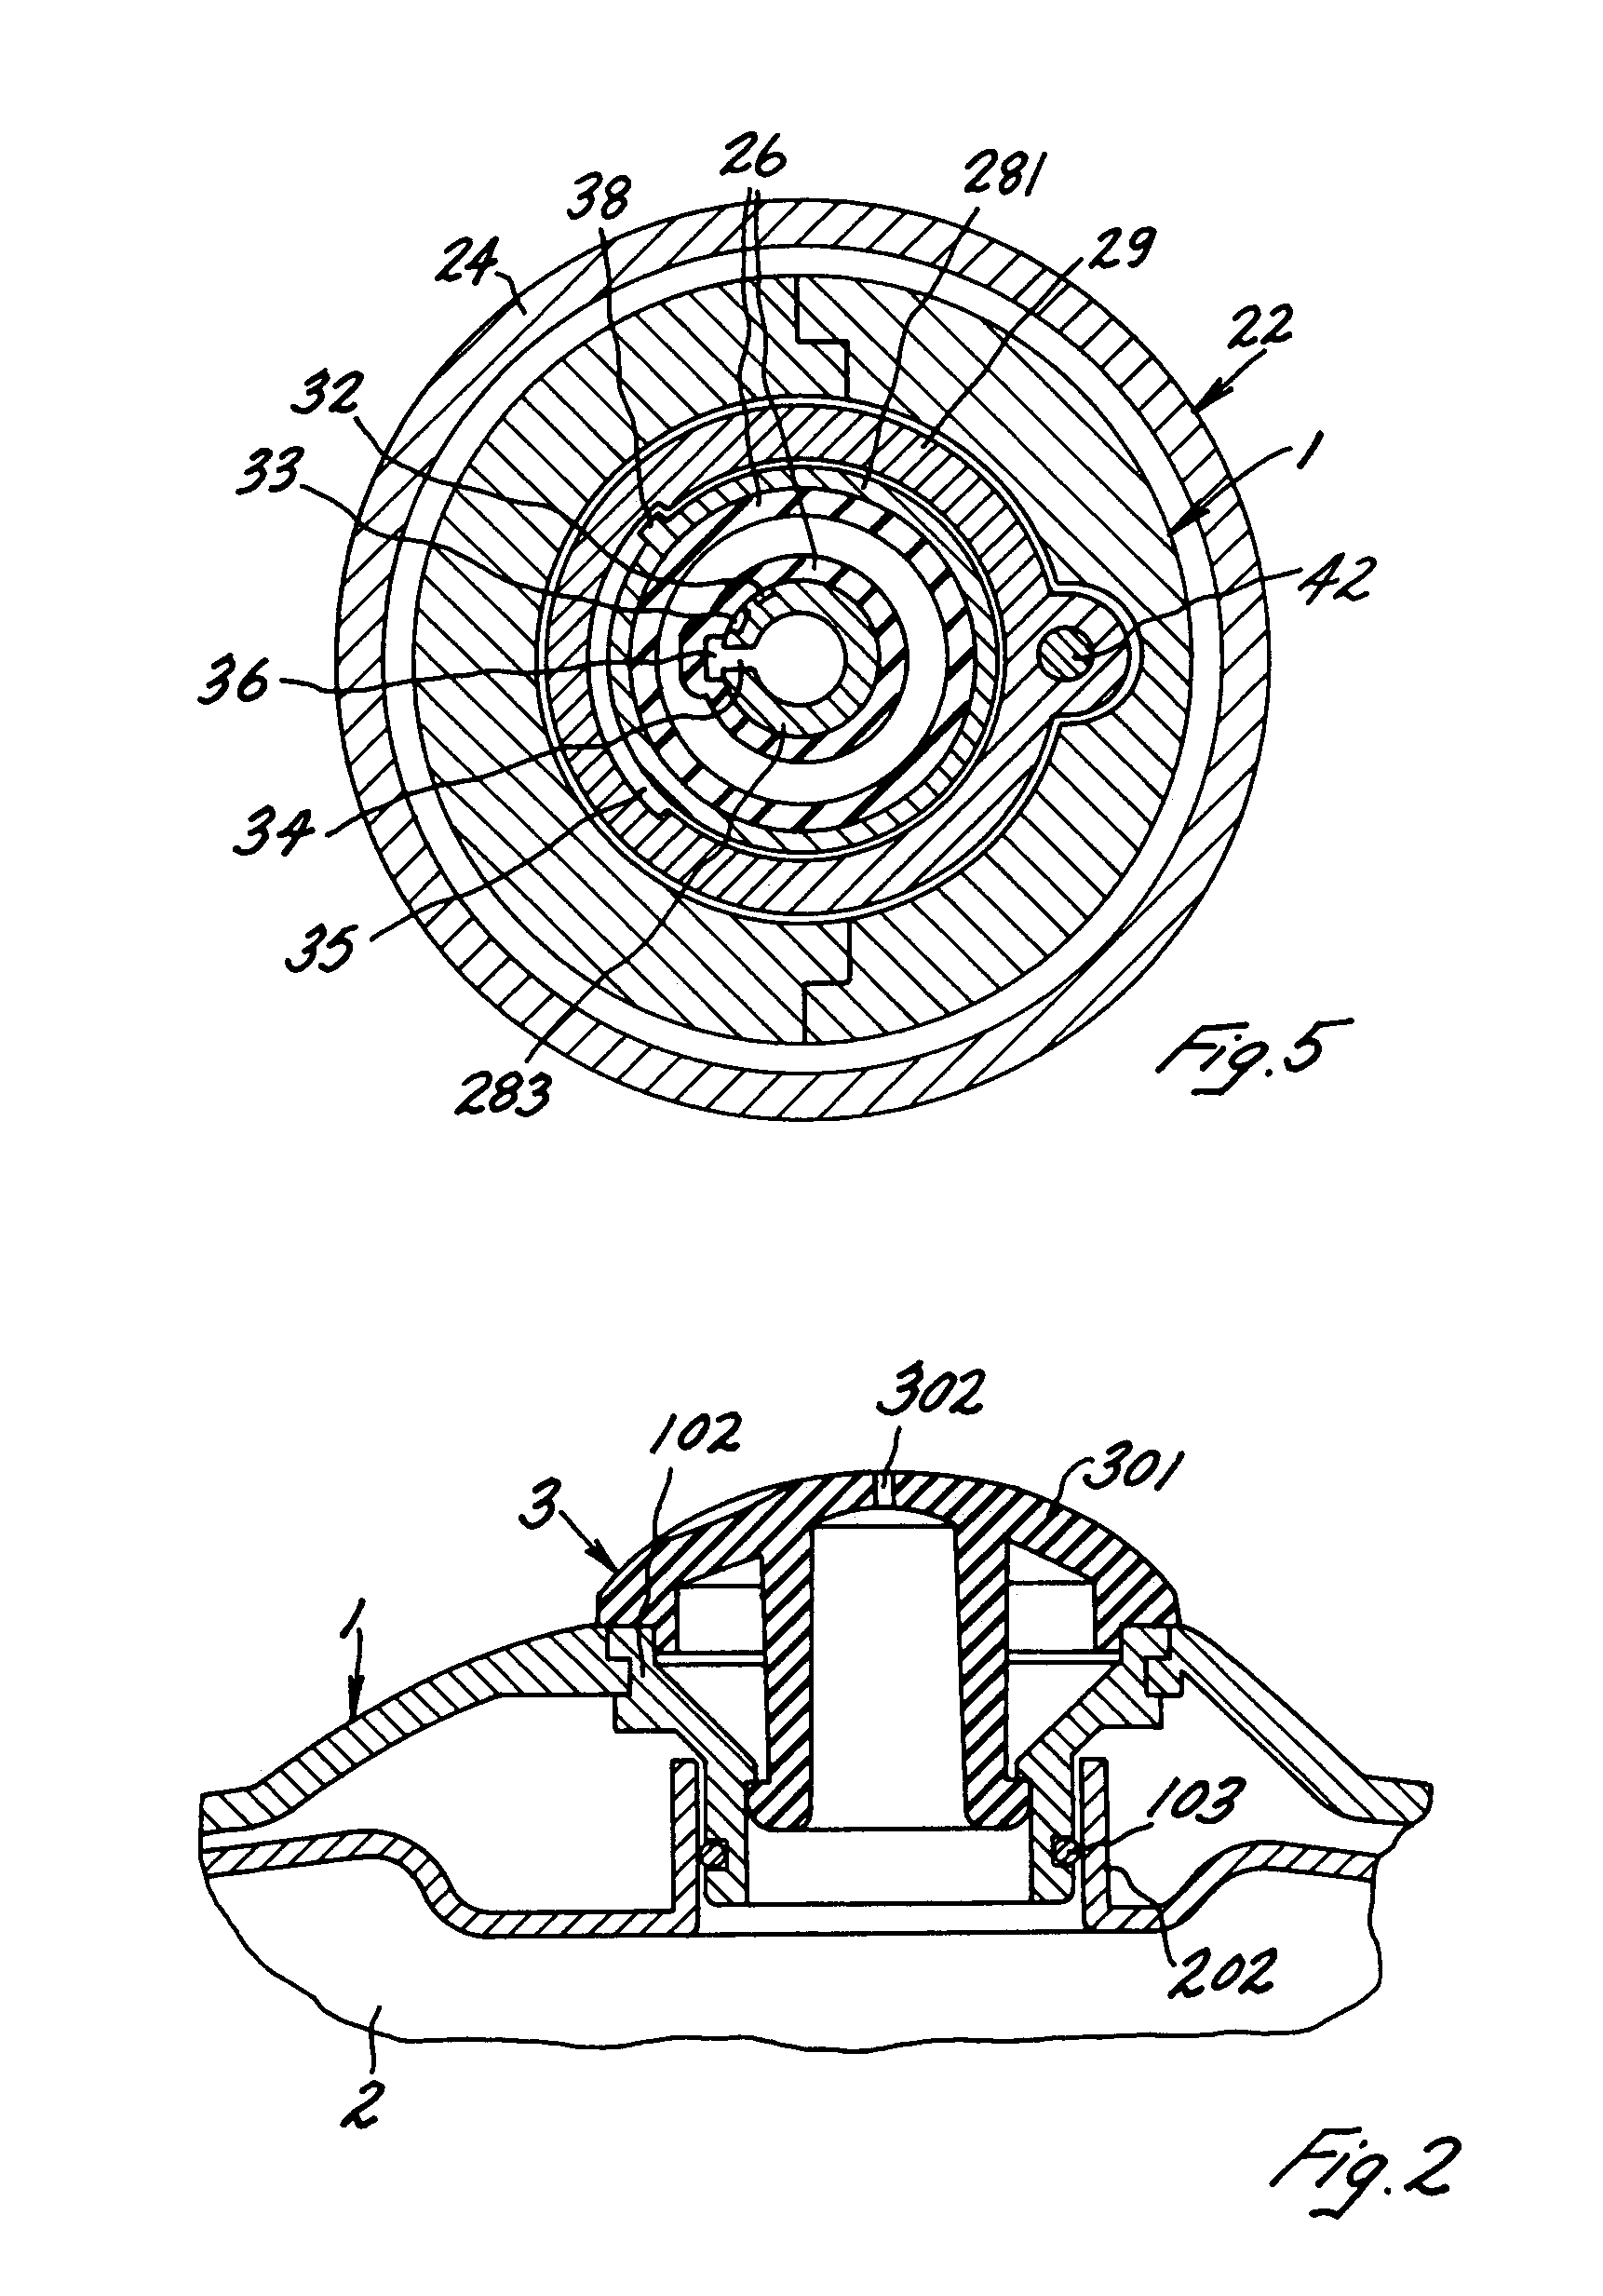 Steam cleaning apparatus